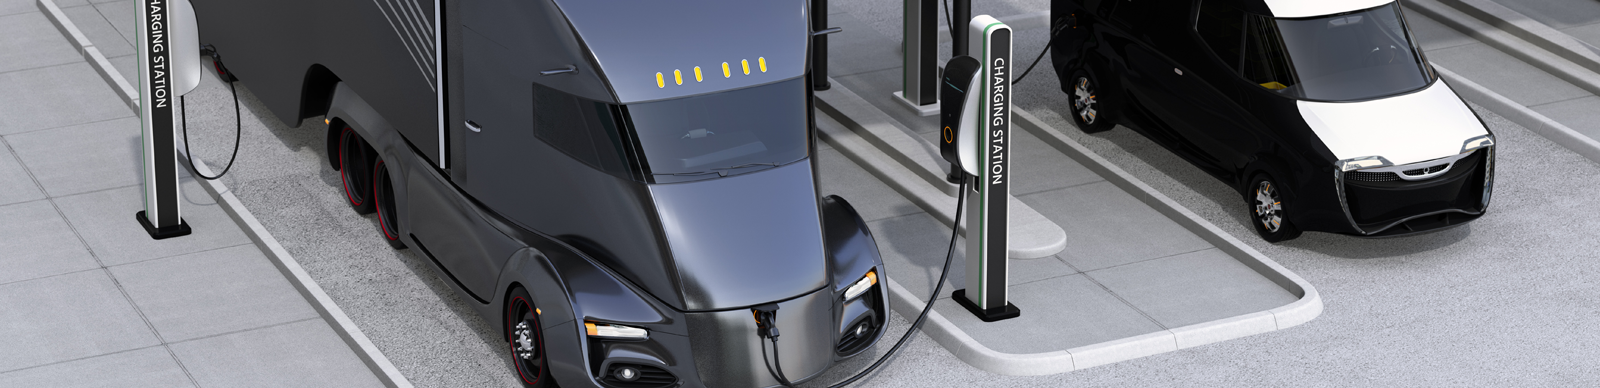 Amping Up: Charging Infrastructure For Electric Trucks - North American ...